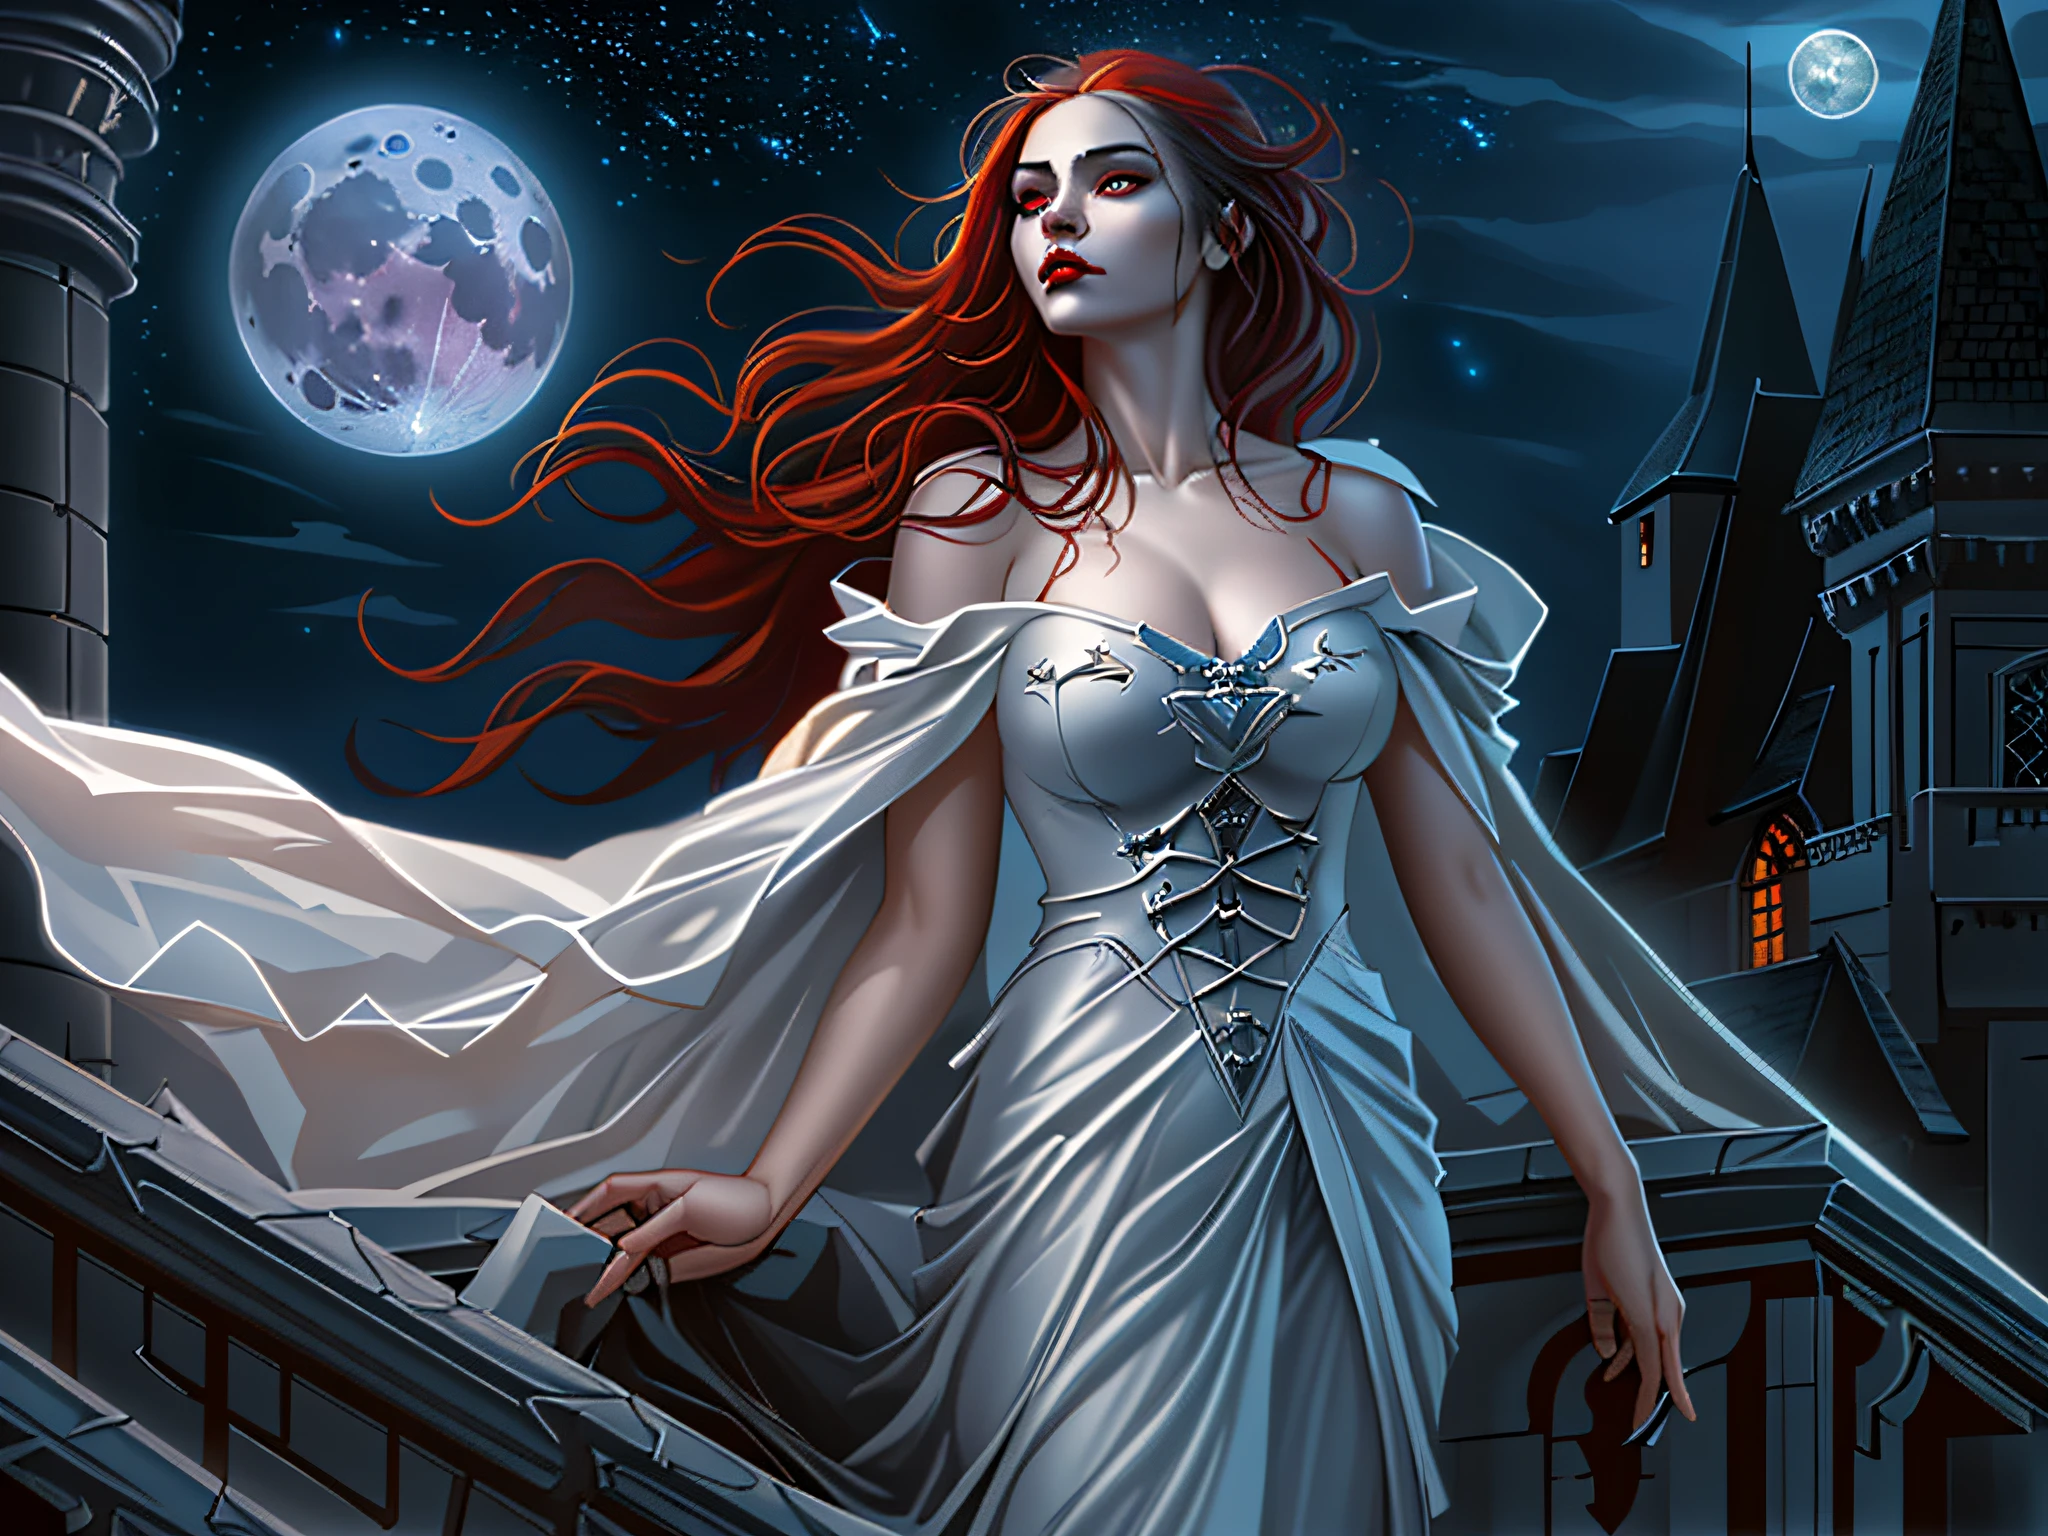 a photorealistic fantasy art picture of an exquisite beautiful female vampire standing under the starry night sky on the porch of her castle, dynamic angle (ultra detailed, Masterpiece, best quality, fantasy art), ultra detailed face (ultra detailed, Masterpiece, best quality, fantasy art), ultra feminine, grey skin, red hair, wavy hair, dynamic eyes color, cold eyes, glowing eyes, intense eyes, dark red lips, [fangs], wearing white dress, elegant style dress (ultra detailed, Masterpiece, best quality, fantasy art), wearing blue cloak (ultra detailed, Masterpiece, best quality, fantasy art), long cloak, flowing cloak (ultra detailed, Masterpiece, best quality, fantasy art), wearing high heeled boots, sky full of stars background, moon, bats flying about, fantasy art, high details, best quality, 16k, [ultra detailed], masterpiece, best quality, (ultra detailed), full body, ultra wide shot, photorealistic, fantasy art, gothic art, many stars, dark fantasy art, gothic art, sense of dread,